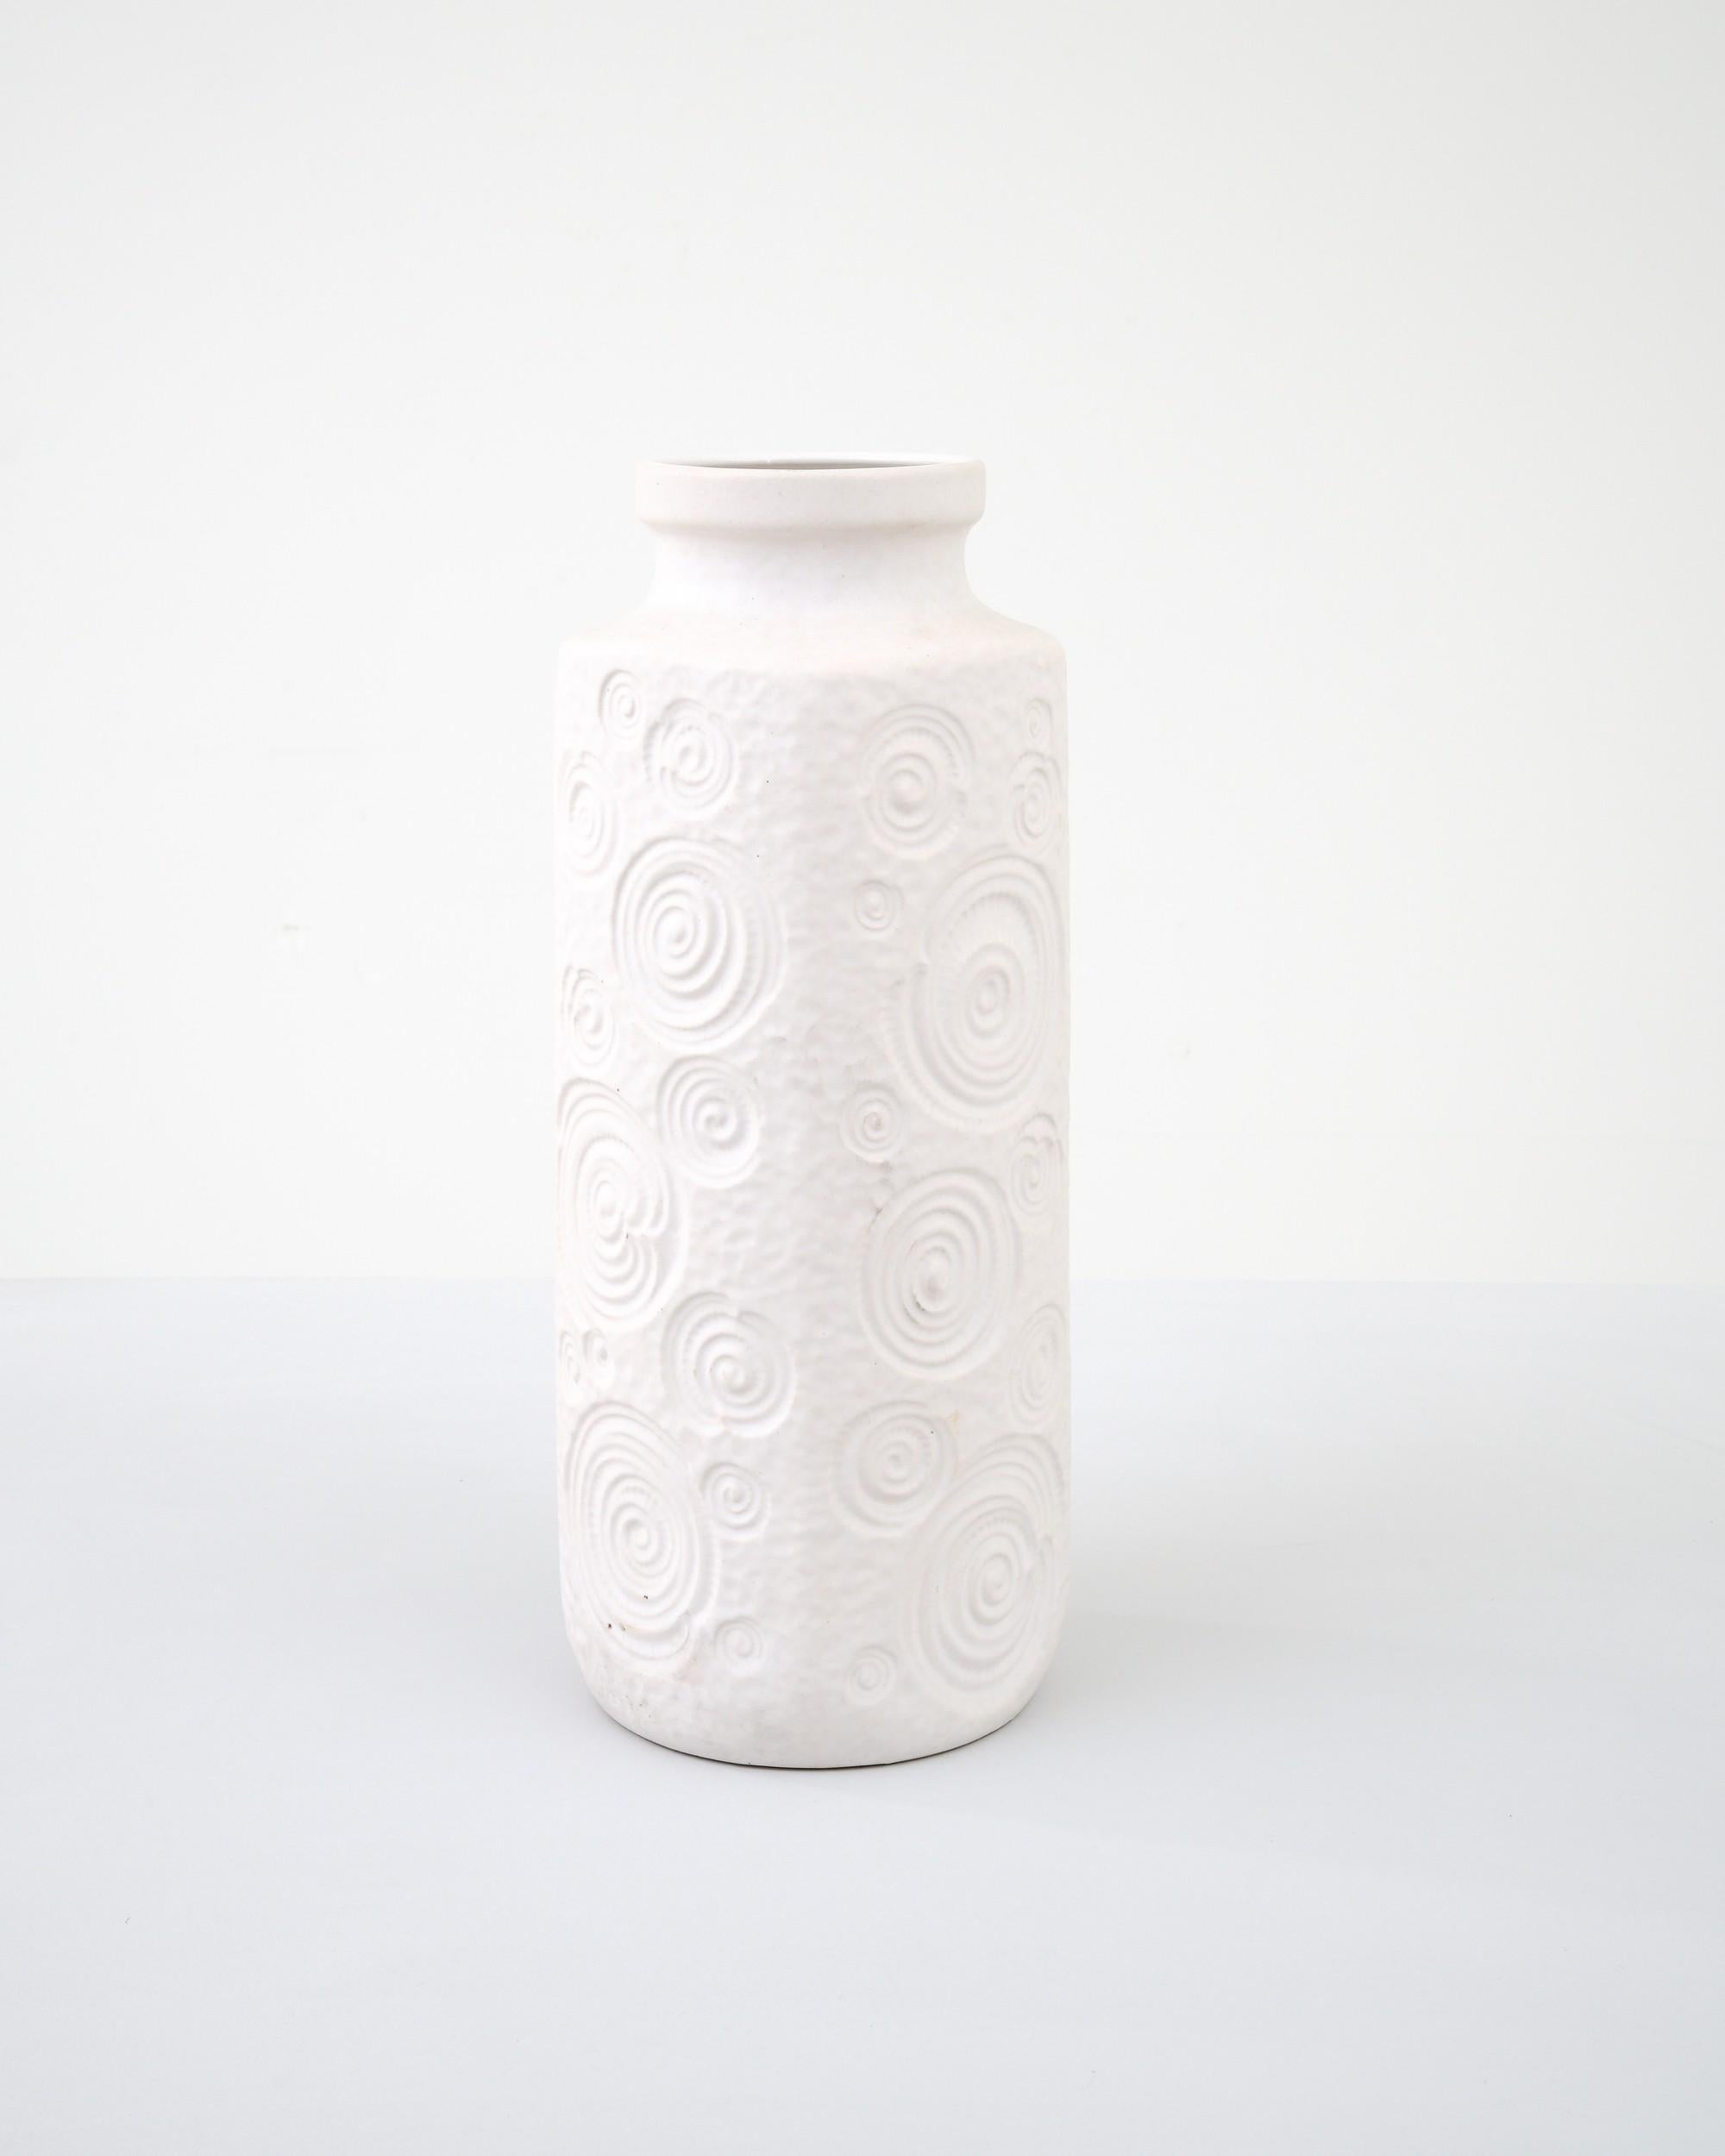 A ceramic vase from mid-20th century Germany. Neither large nor small, this studio made pot reflects the hand-held, and the handmade; the tactility of process and the artist's vision– realized on the potter’s wheel. Patterned white adorns the